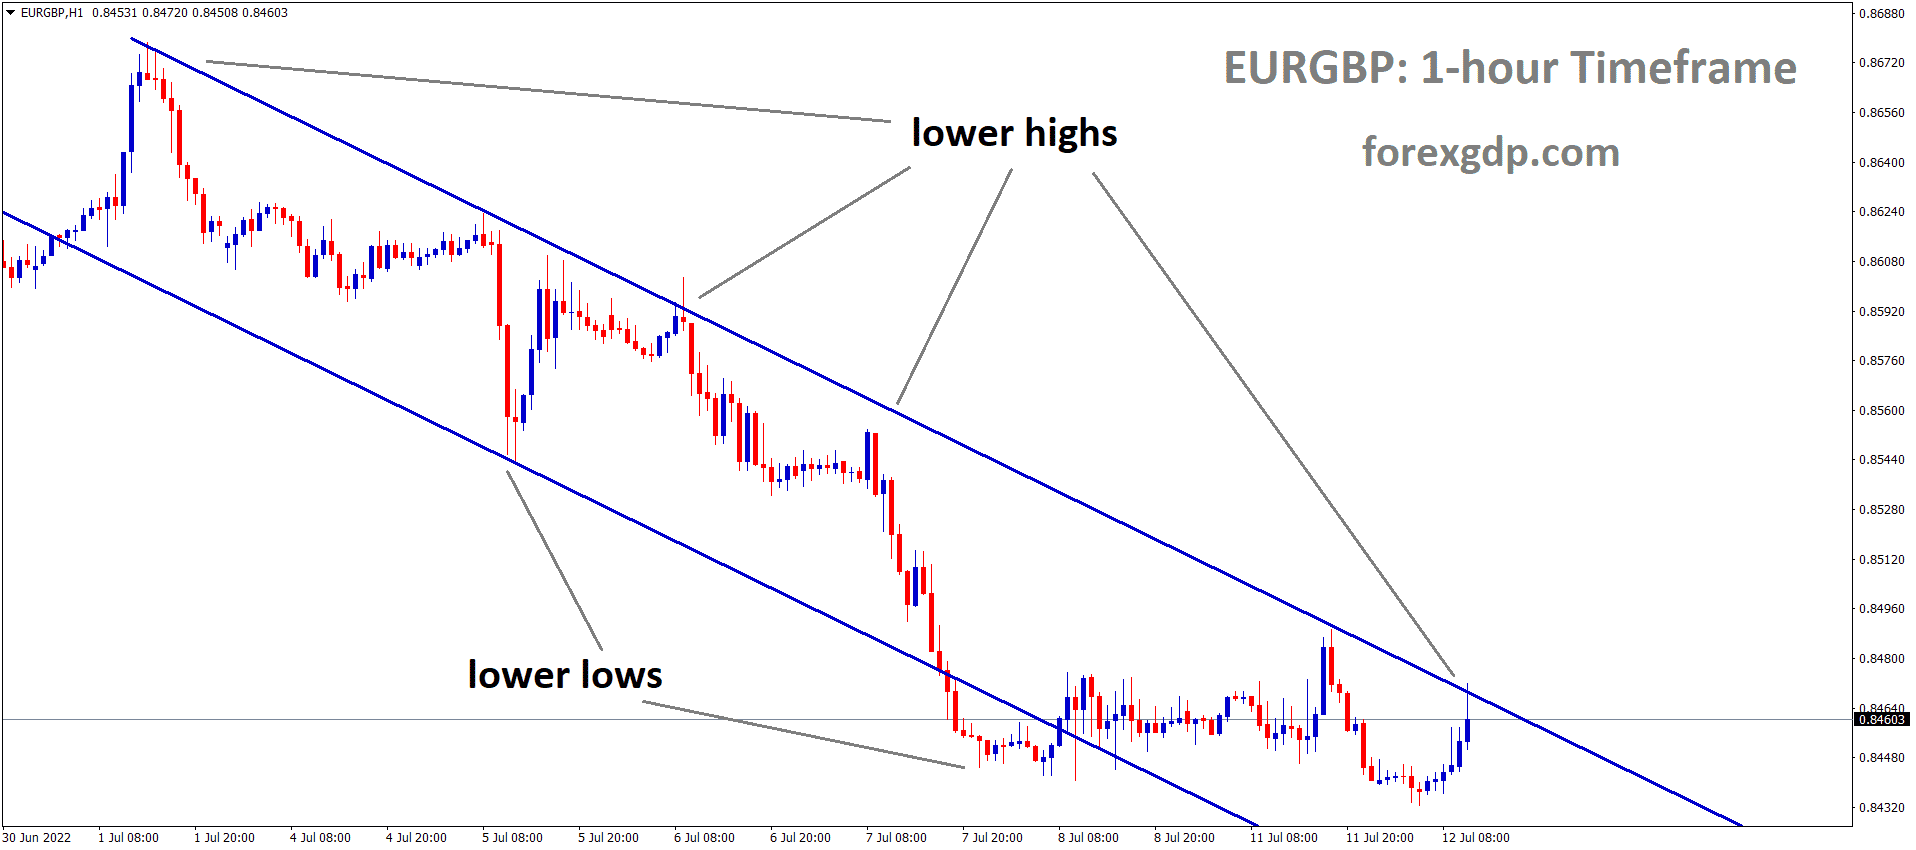 EURGBP H1 TF Analysis Market is moving in the Descending channel and the Market has reached the Lower high area of the channel